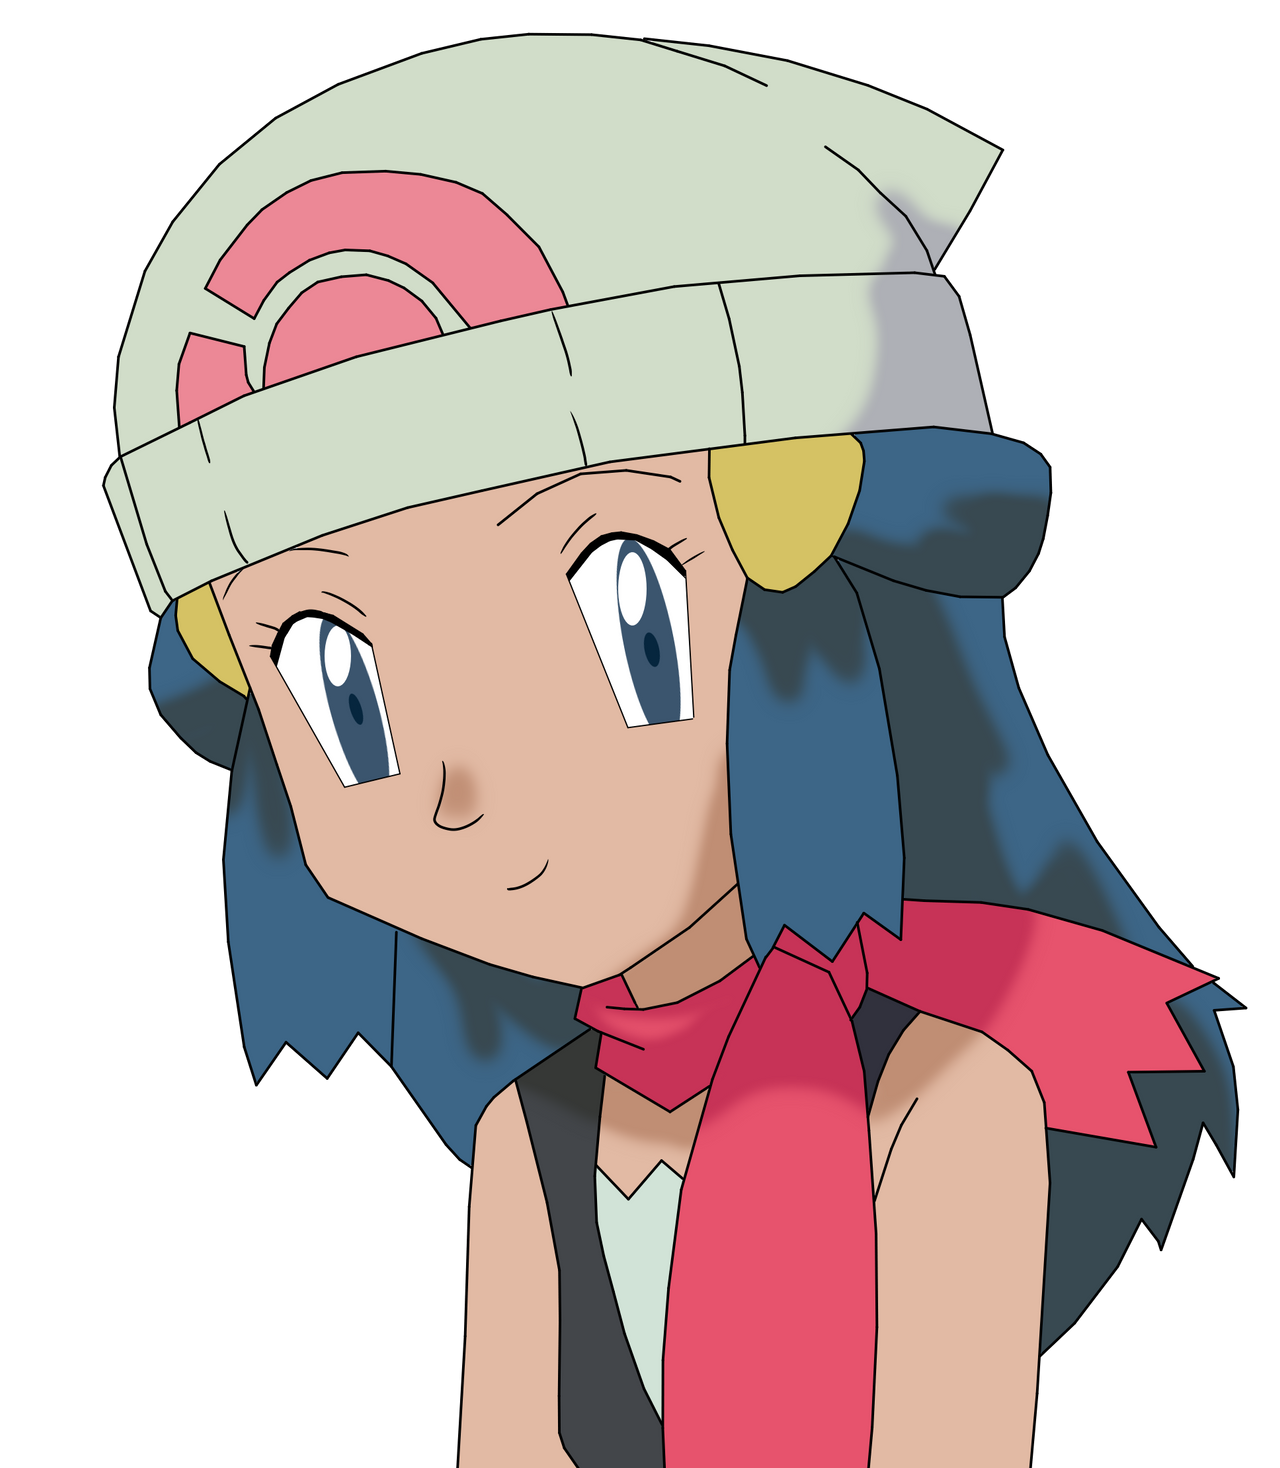 Dawn From Pokemon by CaptainEdwardTeague on DeviantArt